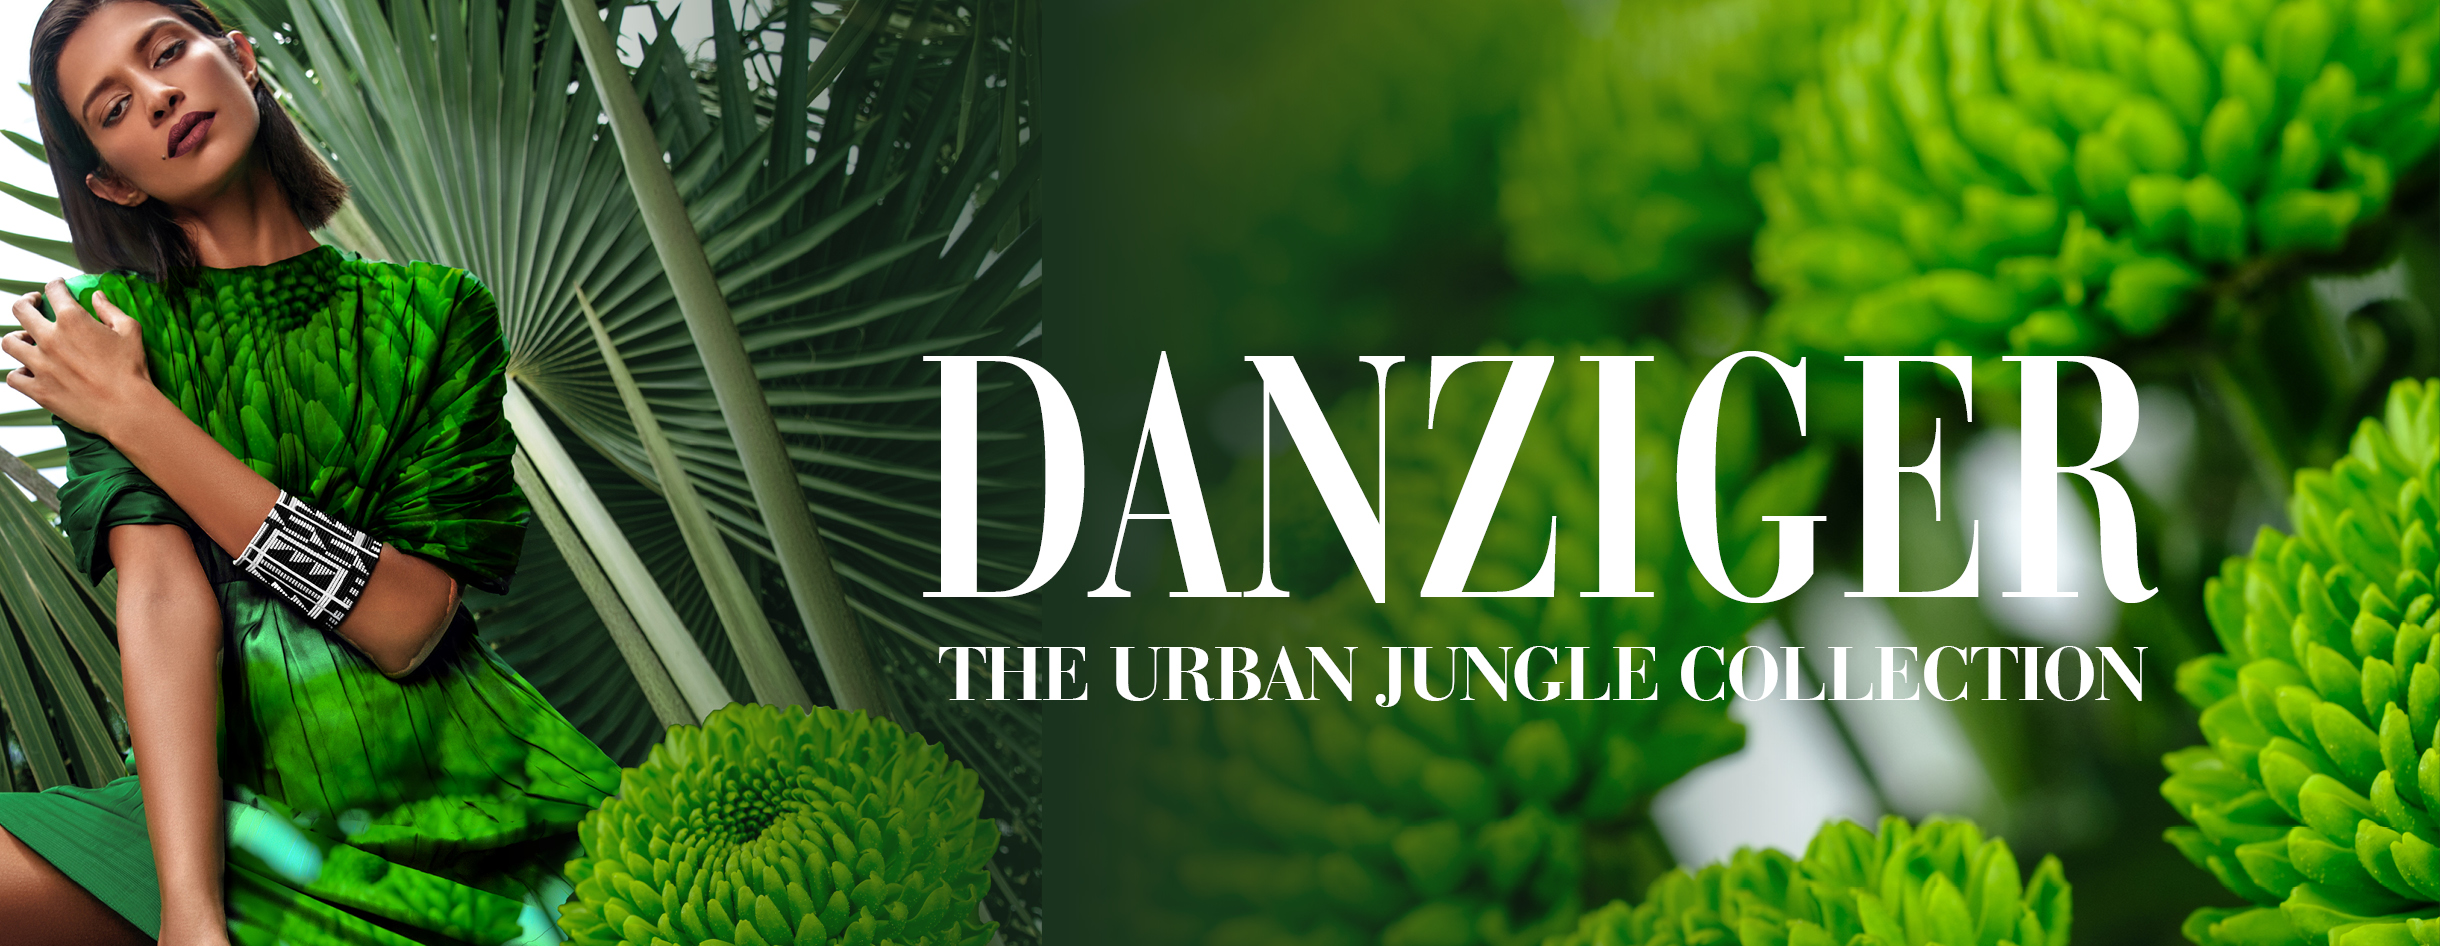 The Urban Jungle collection